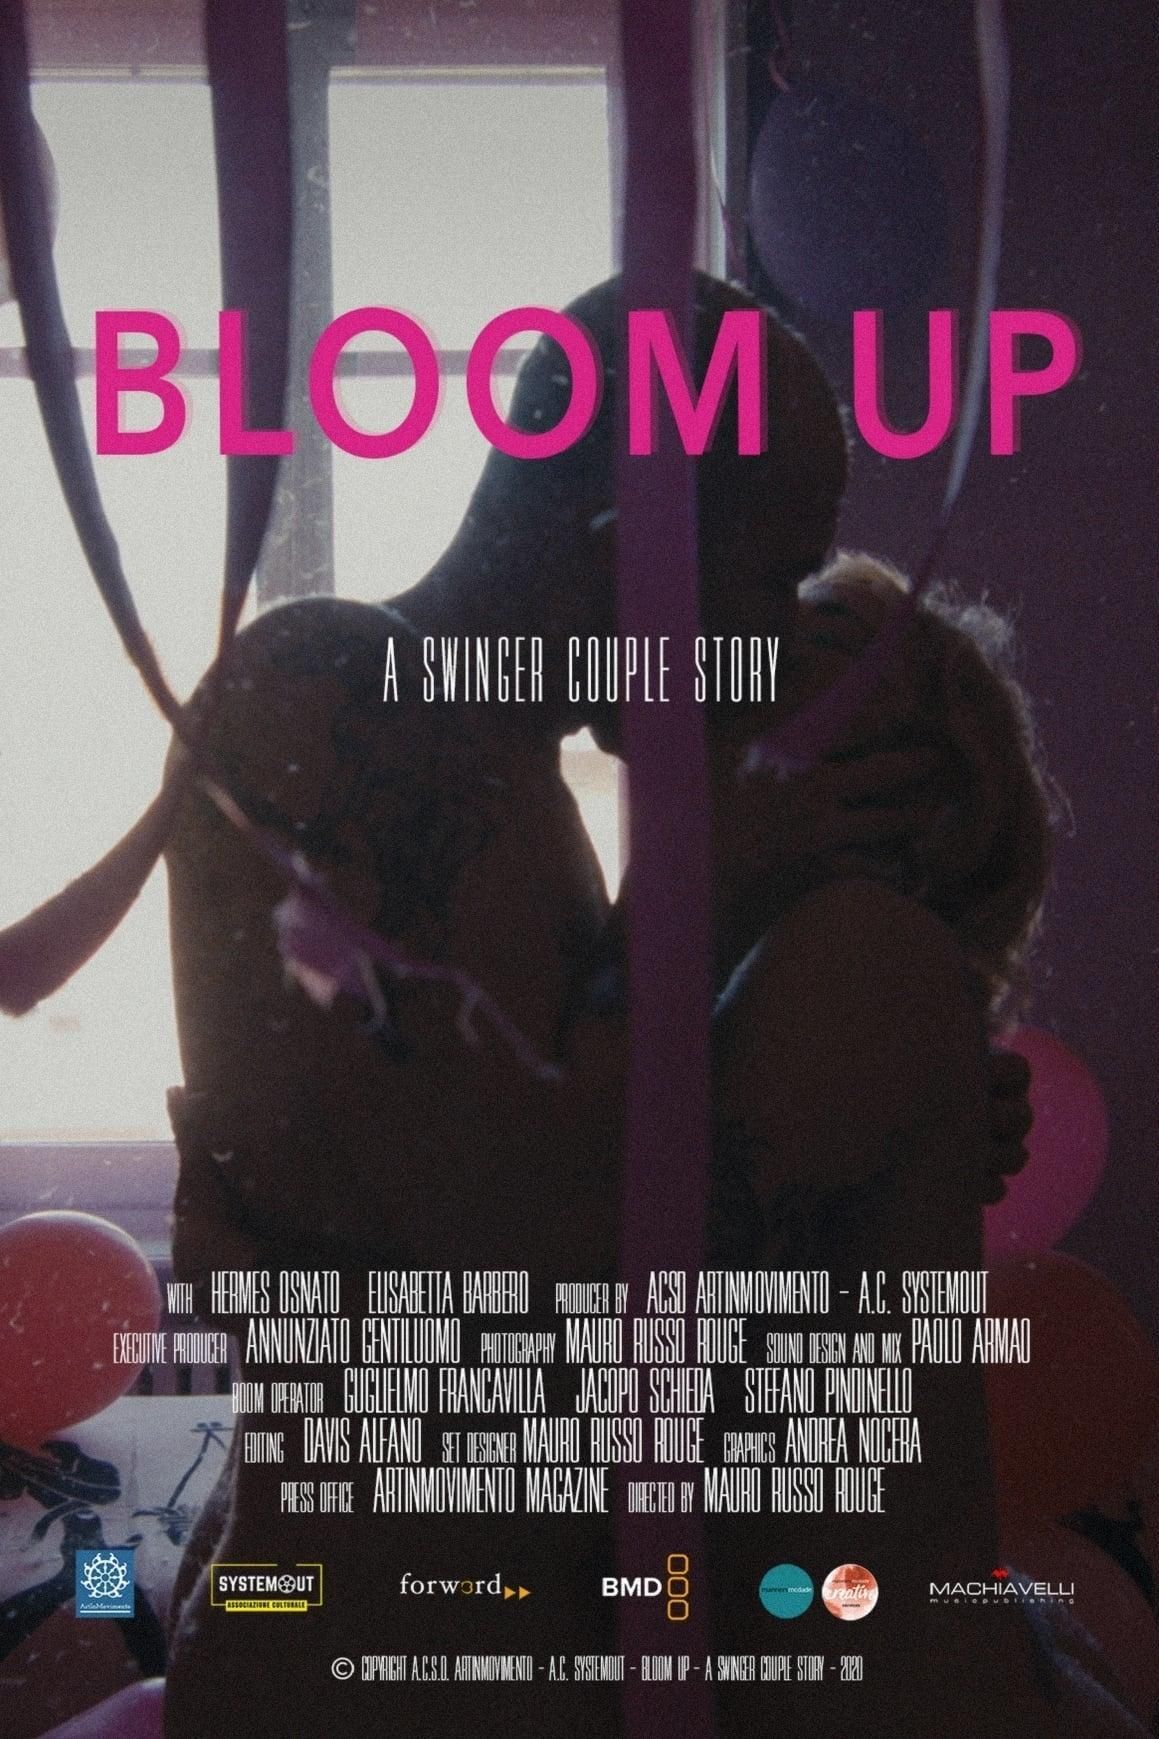 Bloom Up A Swinger Couple Story Movie Information and Trailers KinoCheck